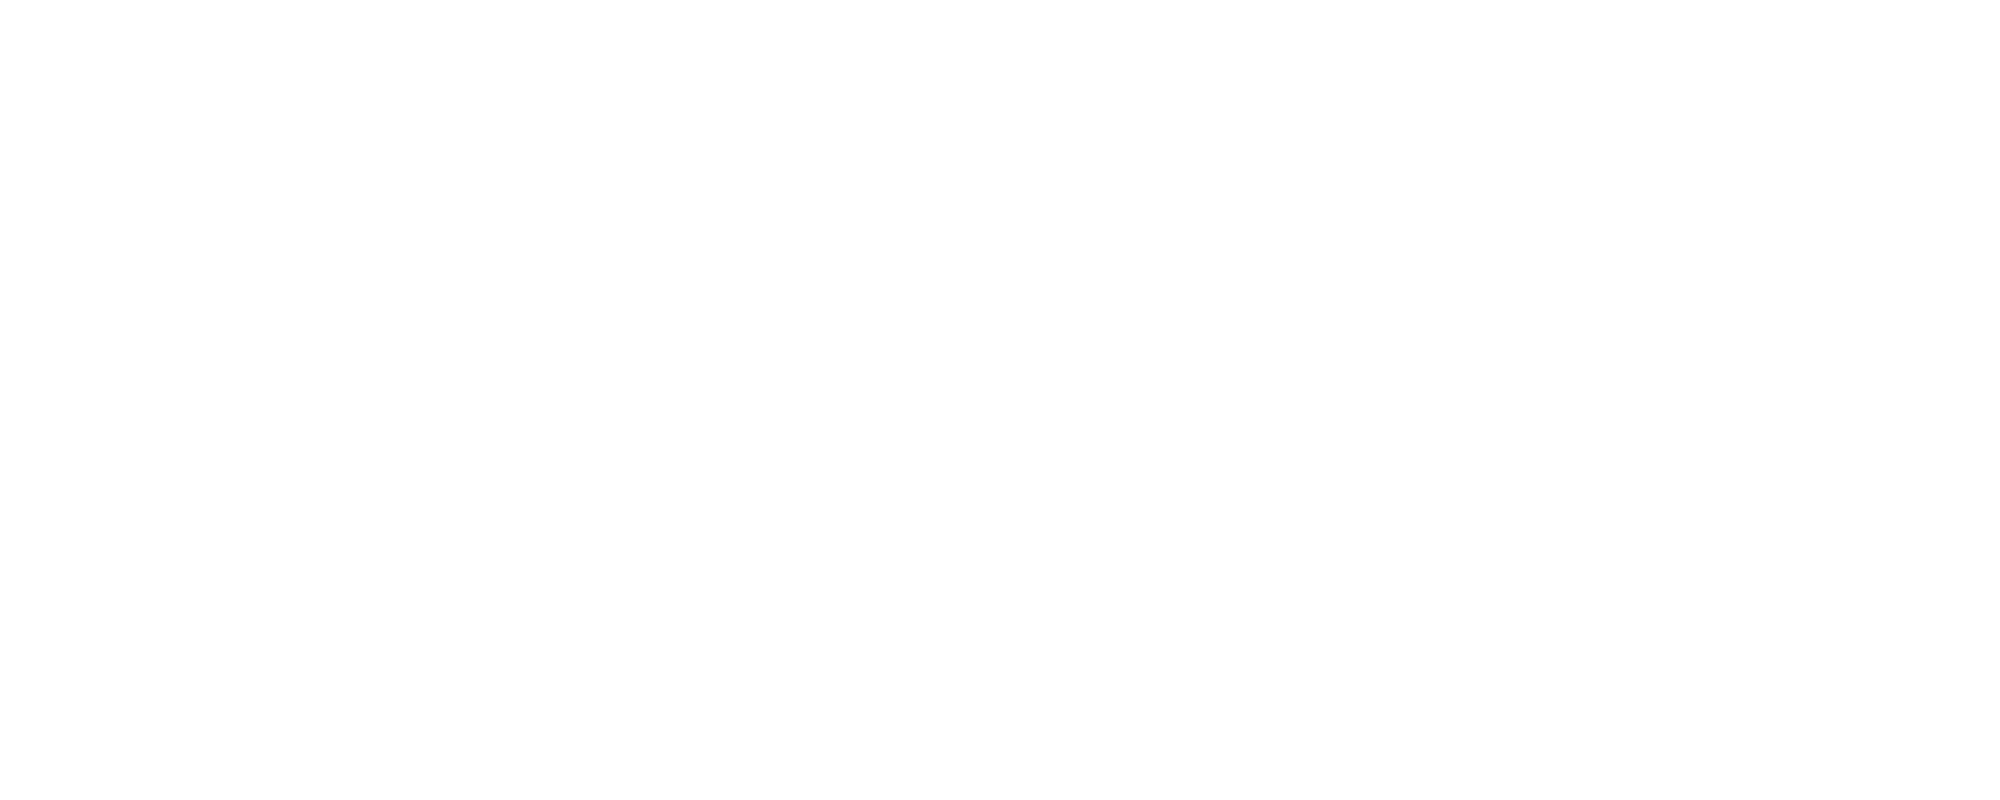 OVATION TV PARTNERS WITH CHARTER COMMUNICATIONS FOR  2020 STAND FOR THE ARTS AWARDS INITIATIVE